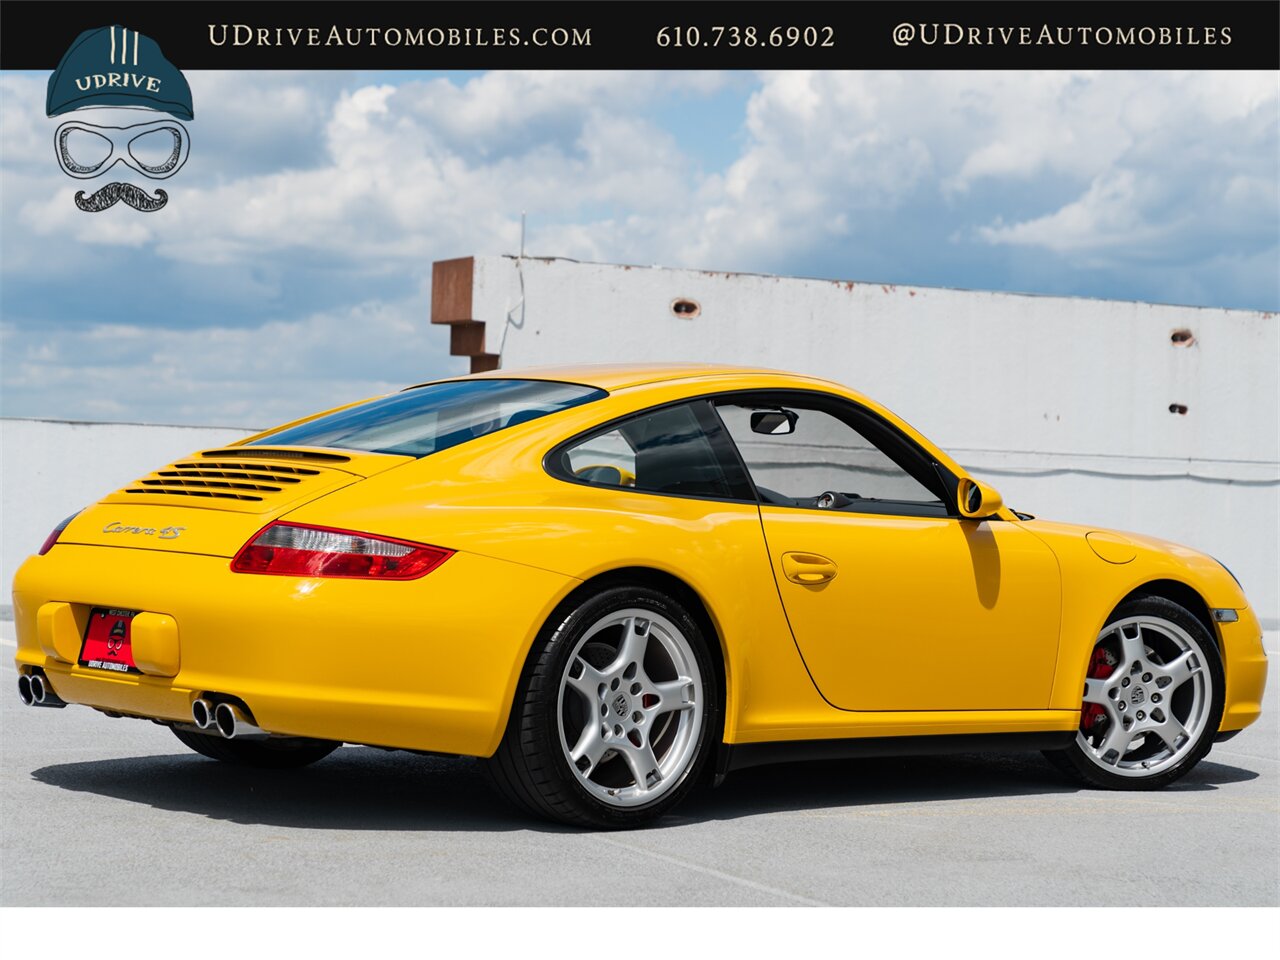 2006 Porsche 911 Carrera 4S  997 C4S 6 Speed Cocoa Full Lthr Chrono Sport Exhaust Special Color Combo - Photo 3 - West Chester, PA 19382